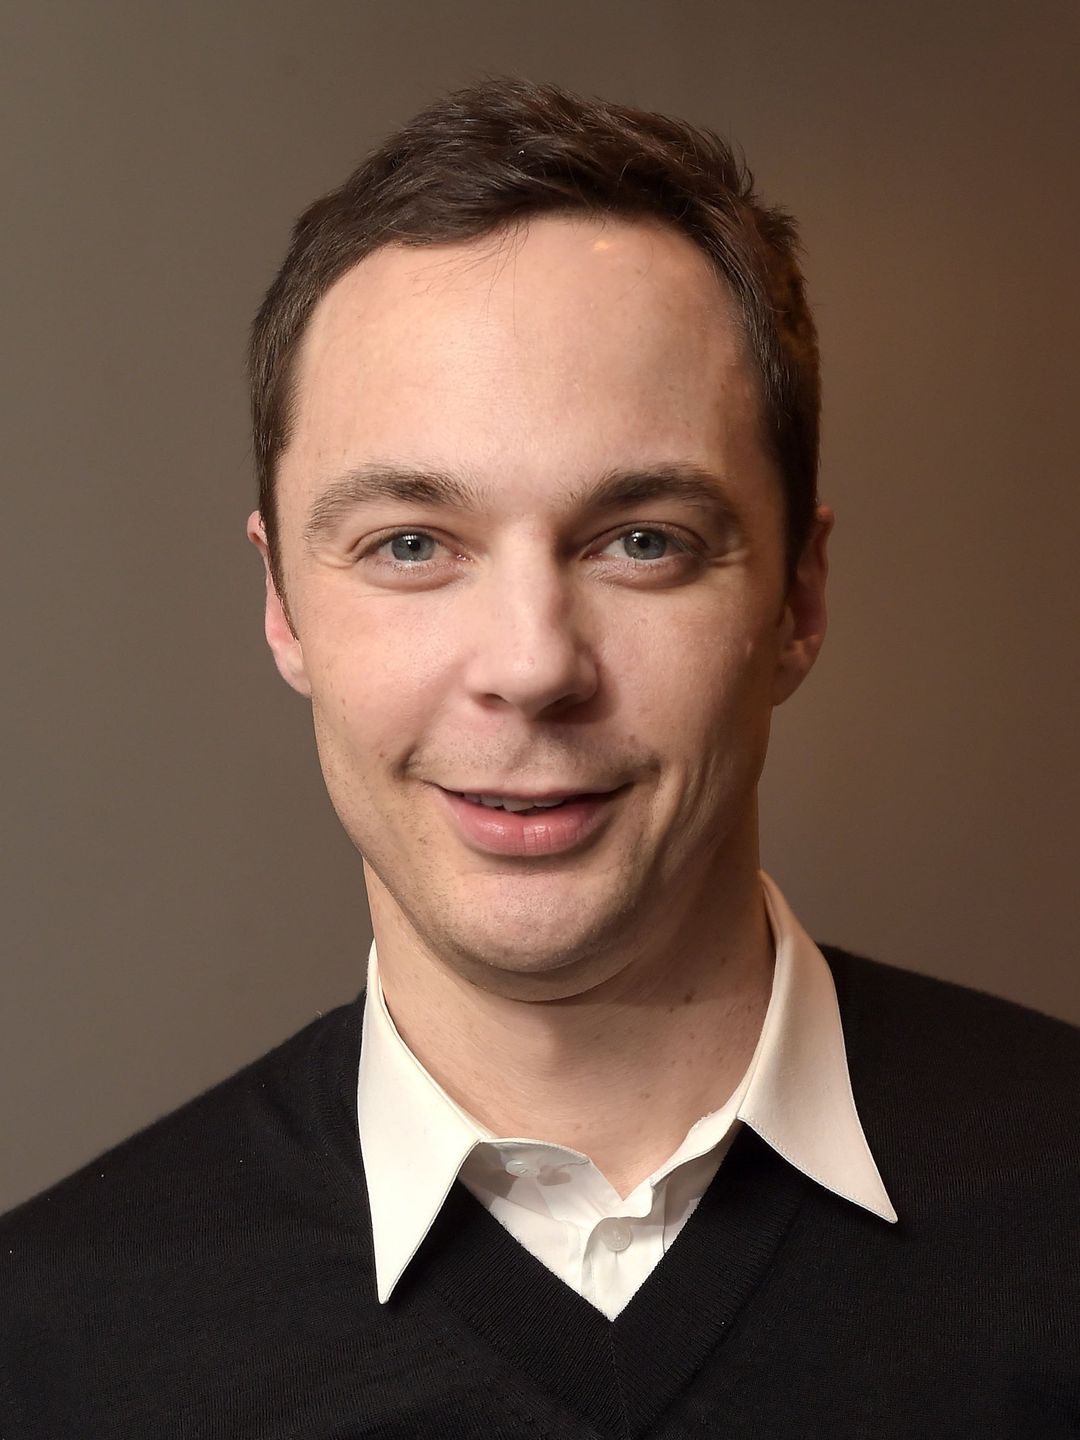 Jim Parsons how old is he